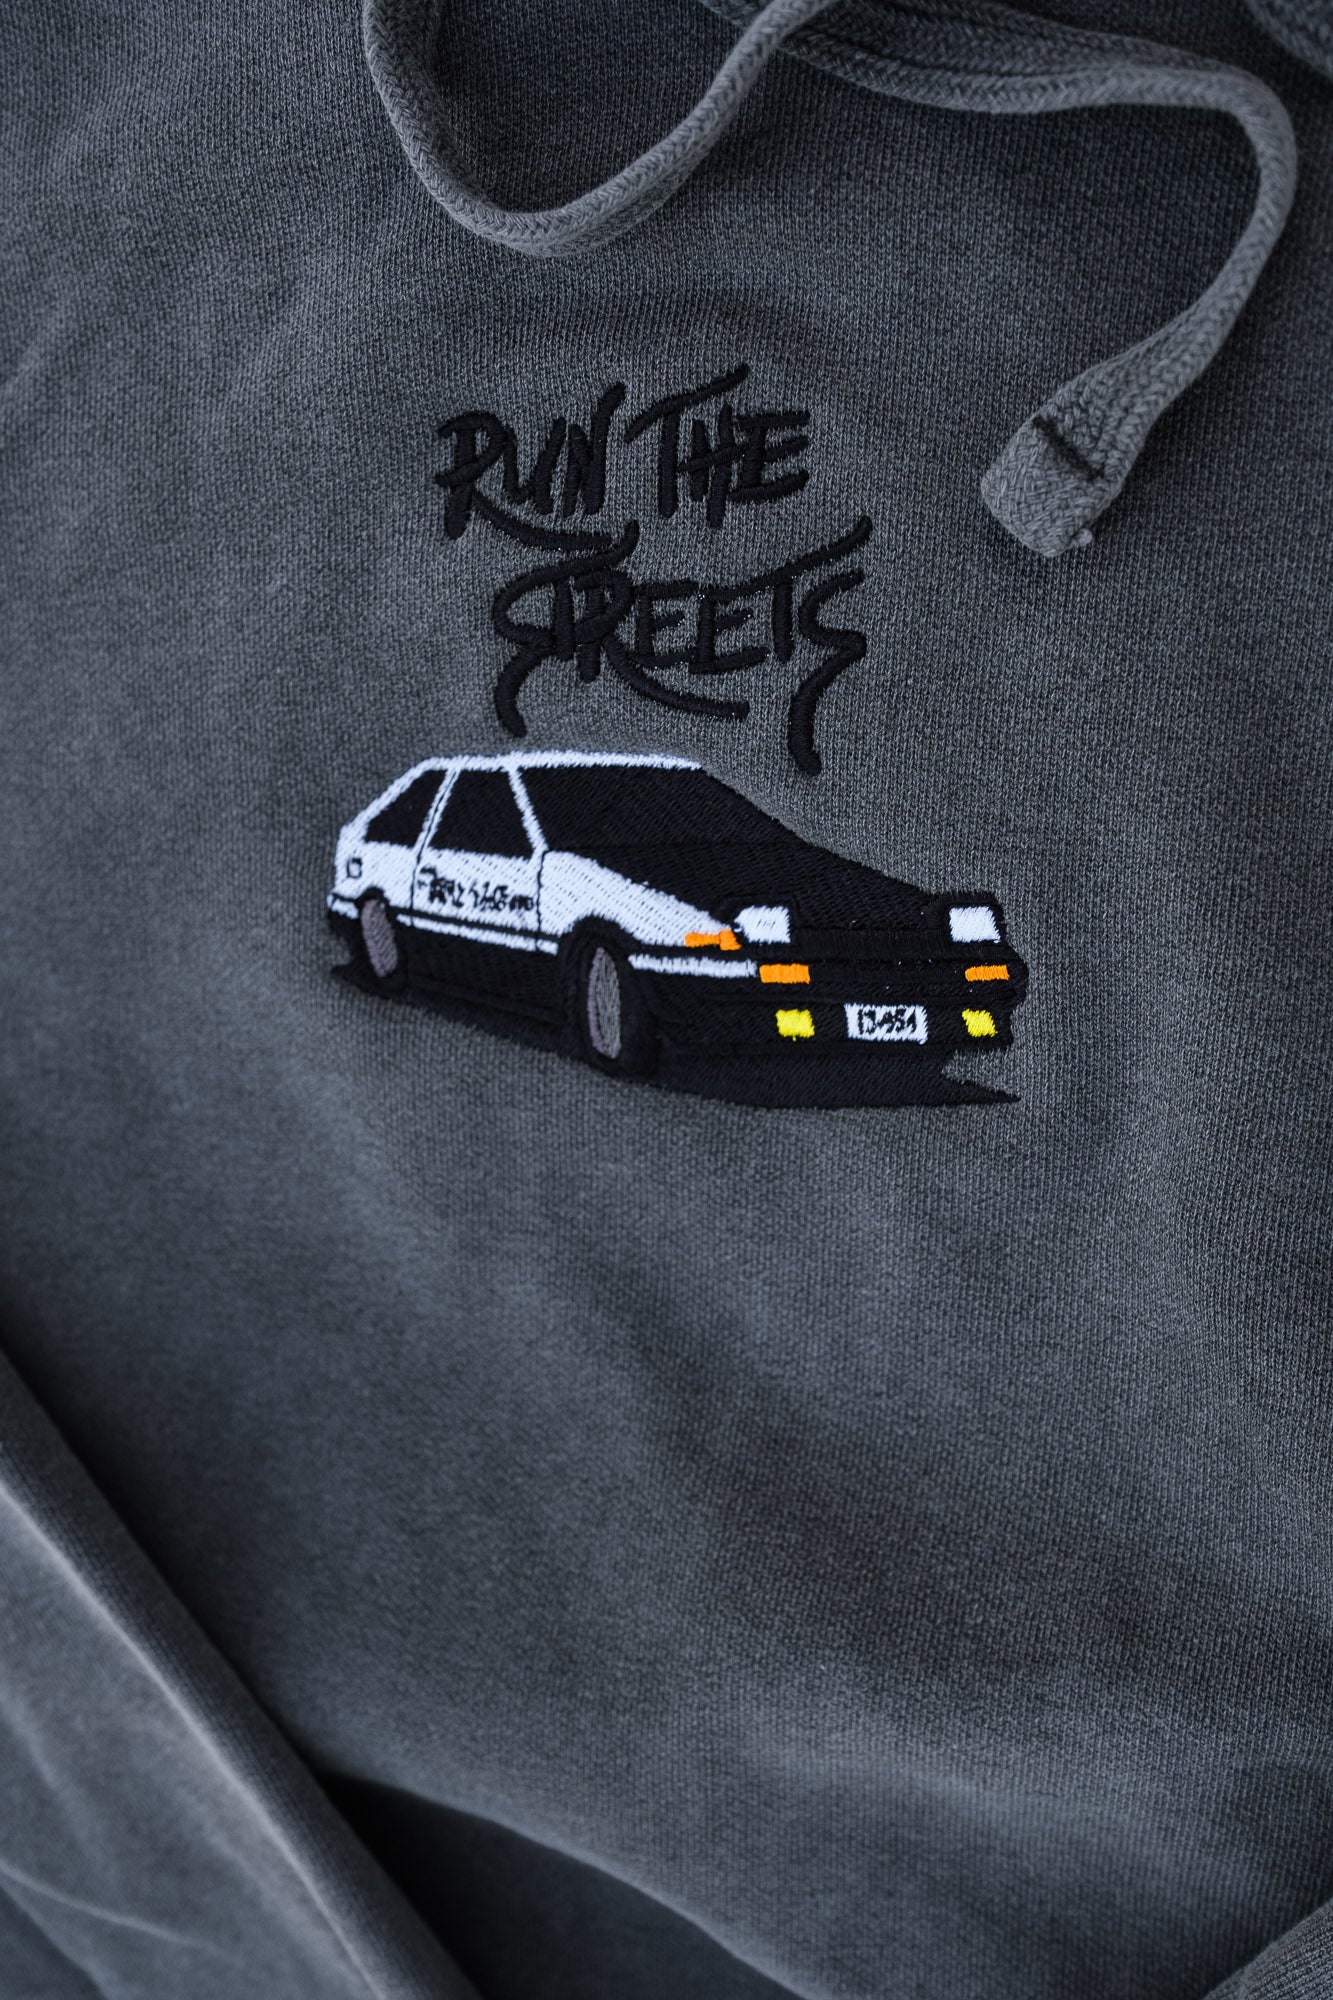 AE86 Embroidered Hoodie